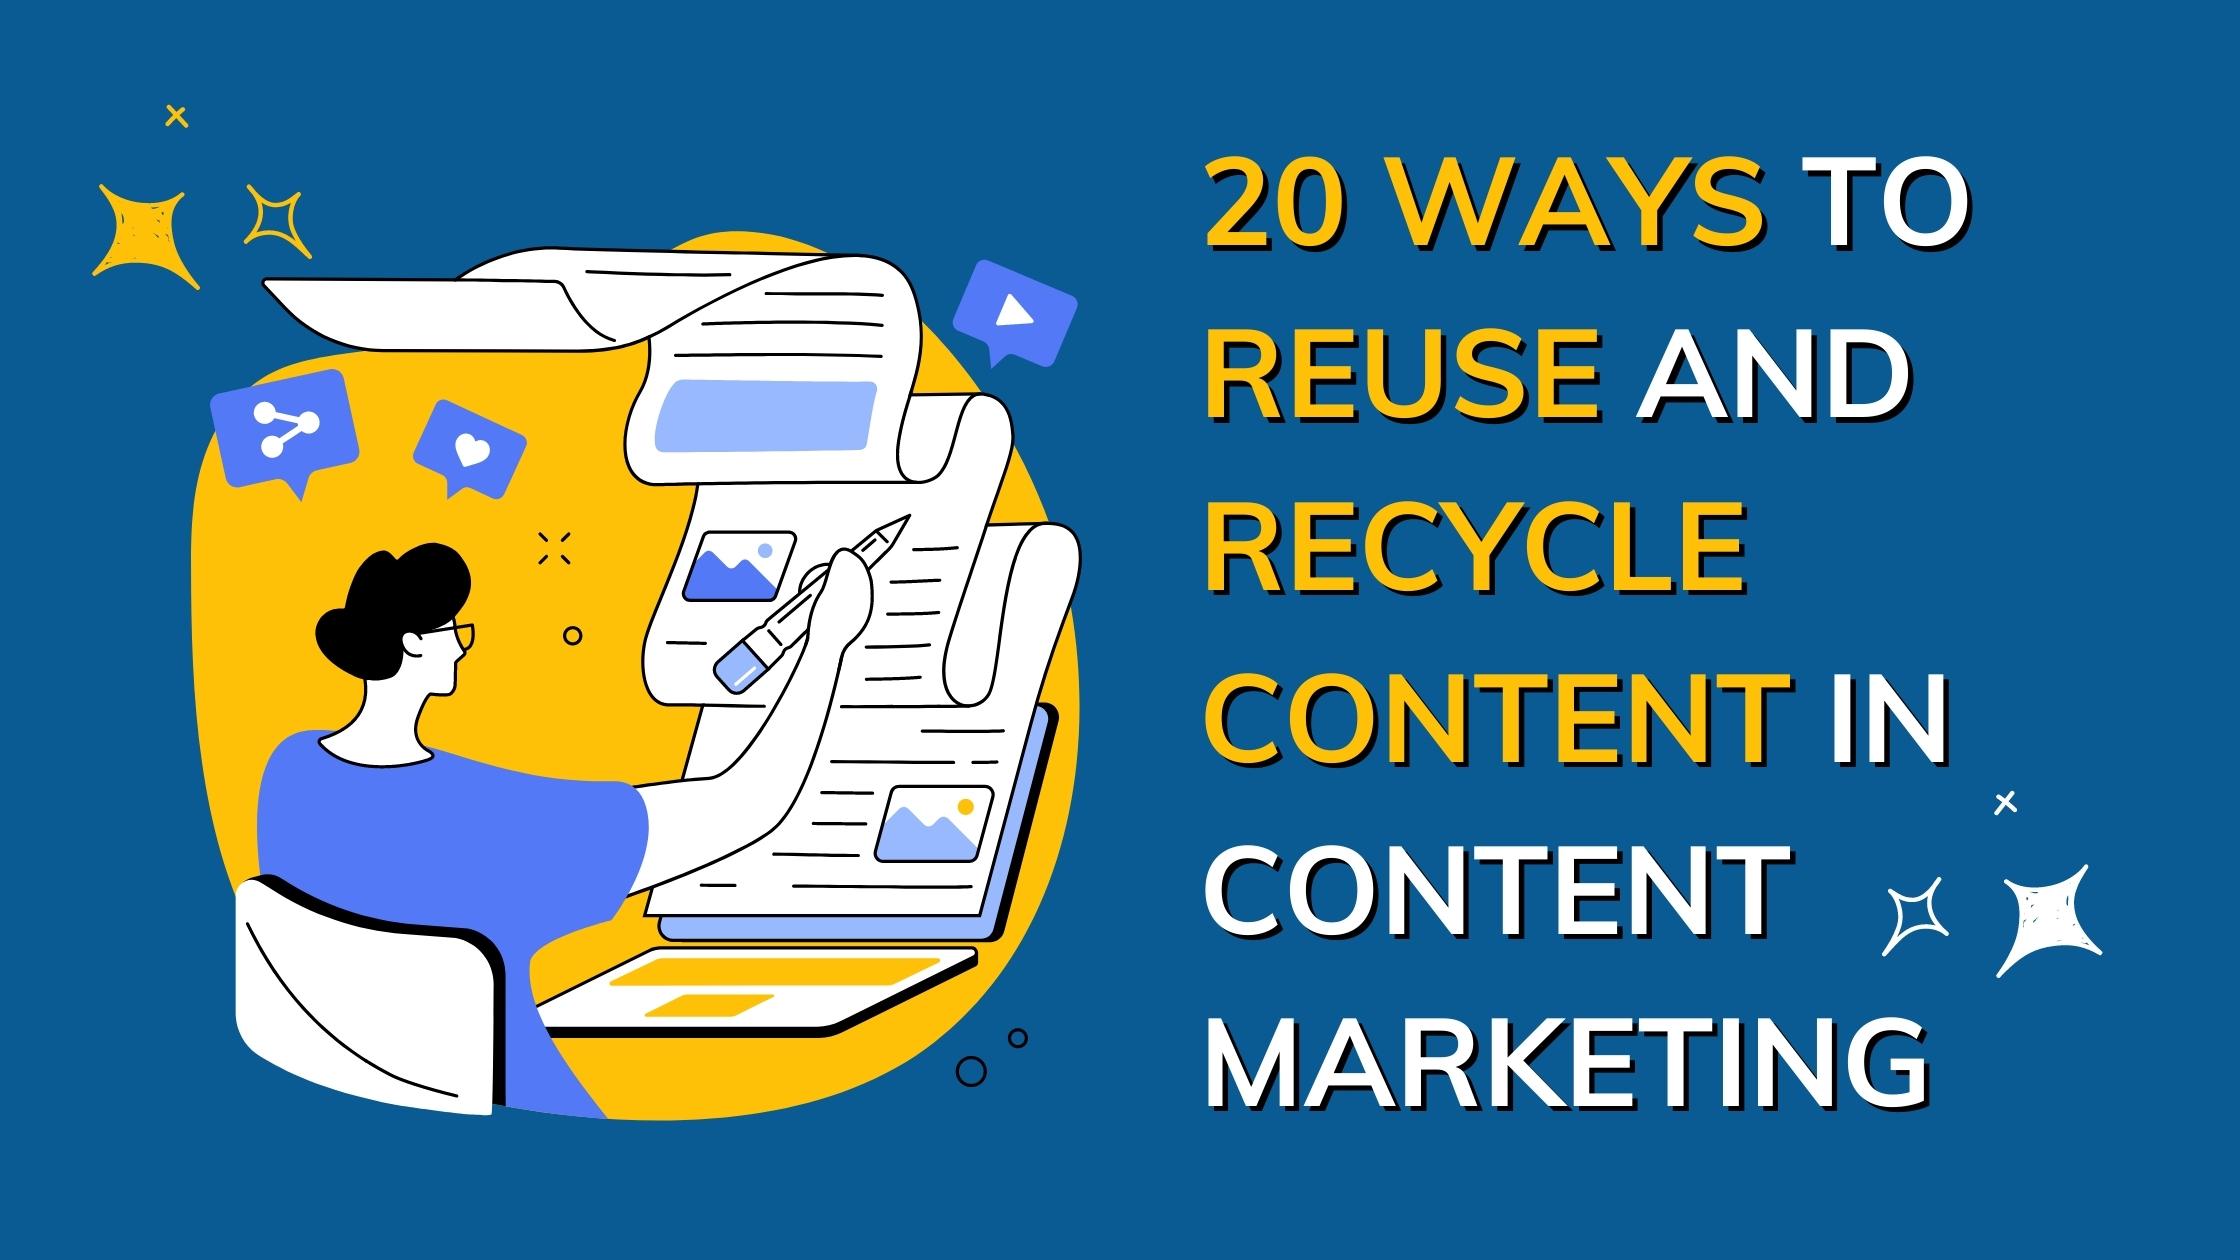 20 Ways to Reuse and Recycle Content in Content Marketing